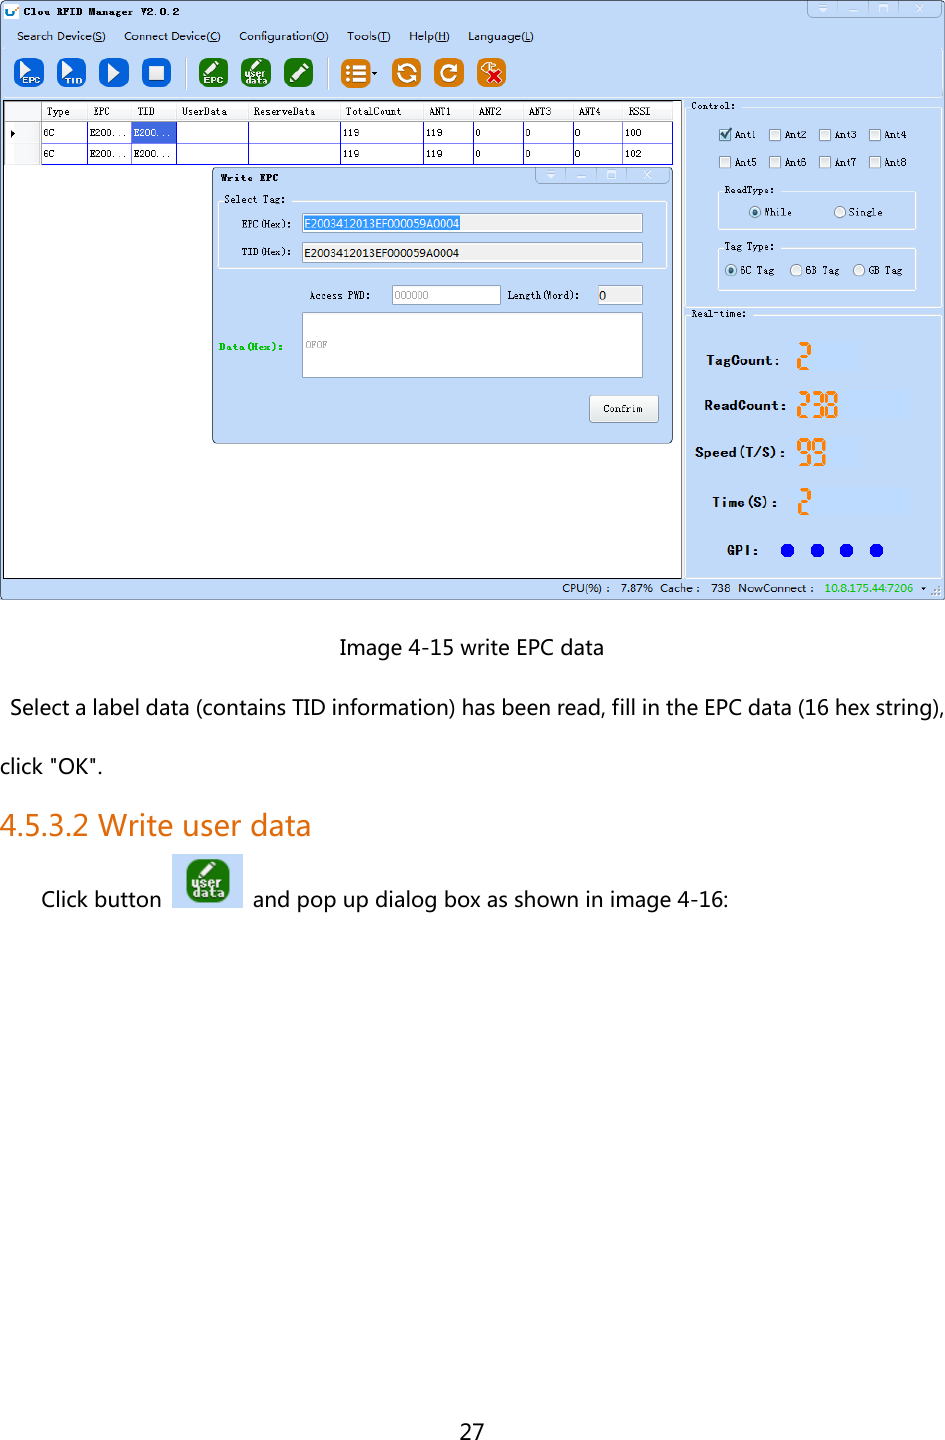  27   Image 4-15 write EPC data Select a label data (contains TID information) has been read, fill in the EPC data (16 hex string), click &quot;OK&quot;. 4.5.3.2 Write user data Click button    and pop up dialog box as shown in image 4-16: 